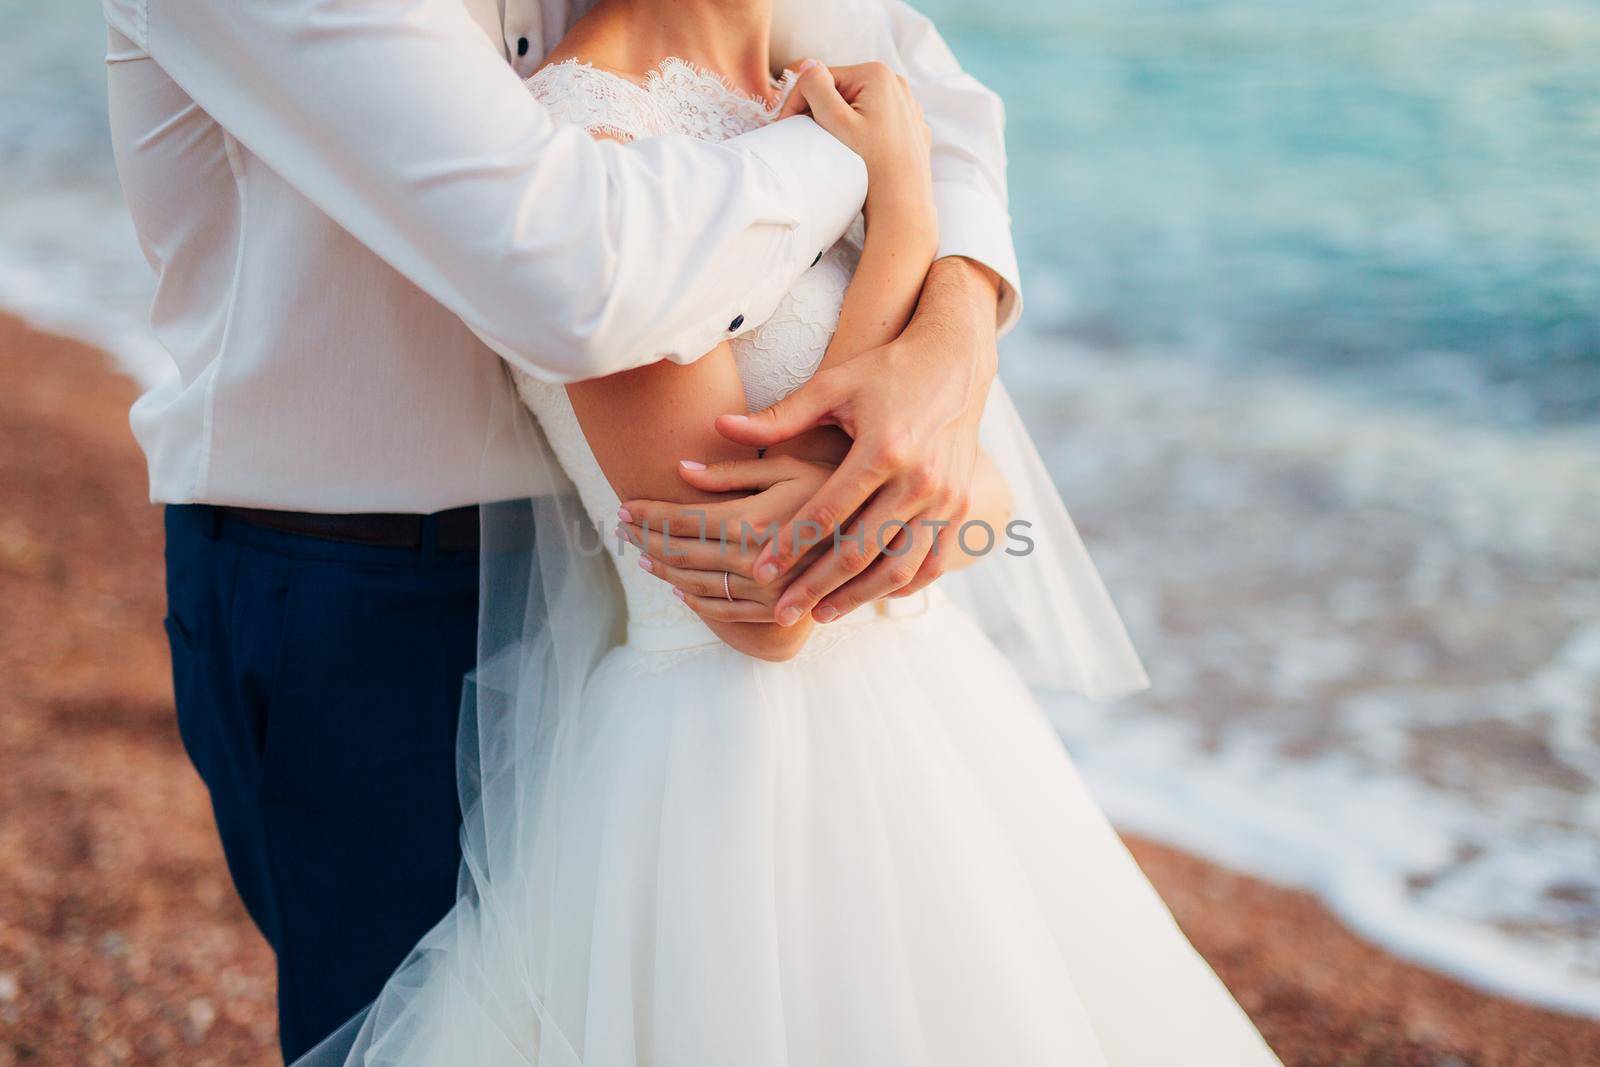 Newlyweds hug each other in Montenegro by Nadtochiy